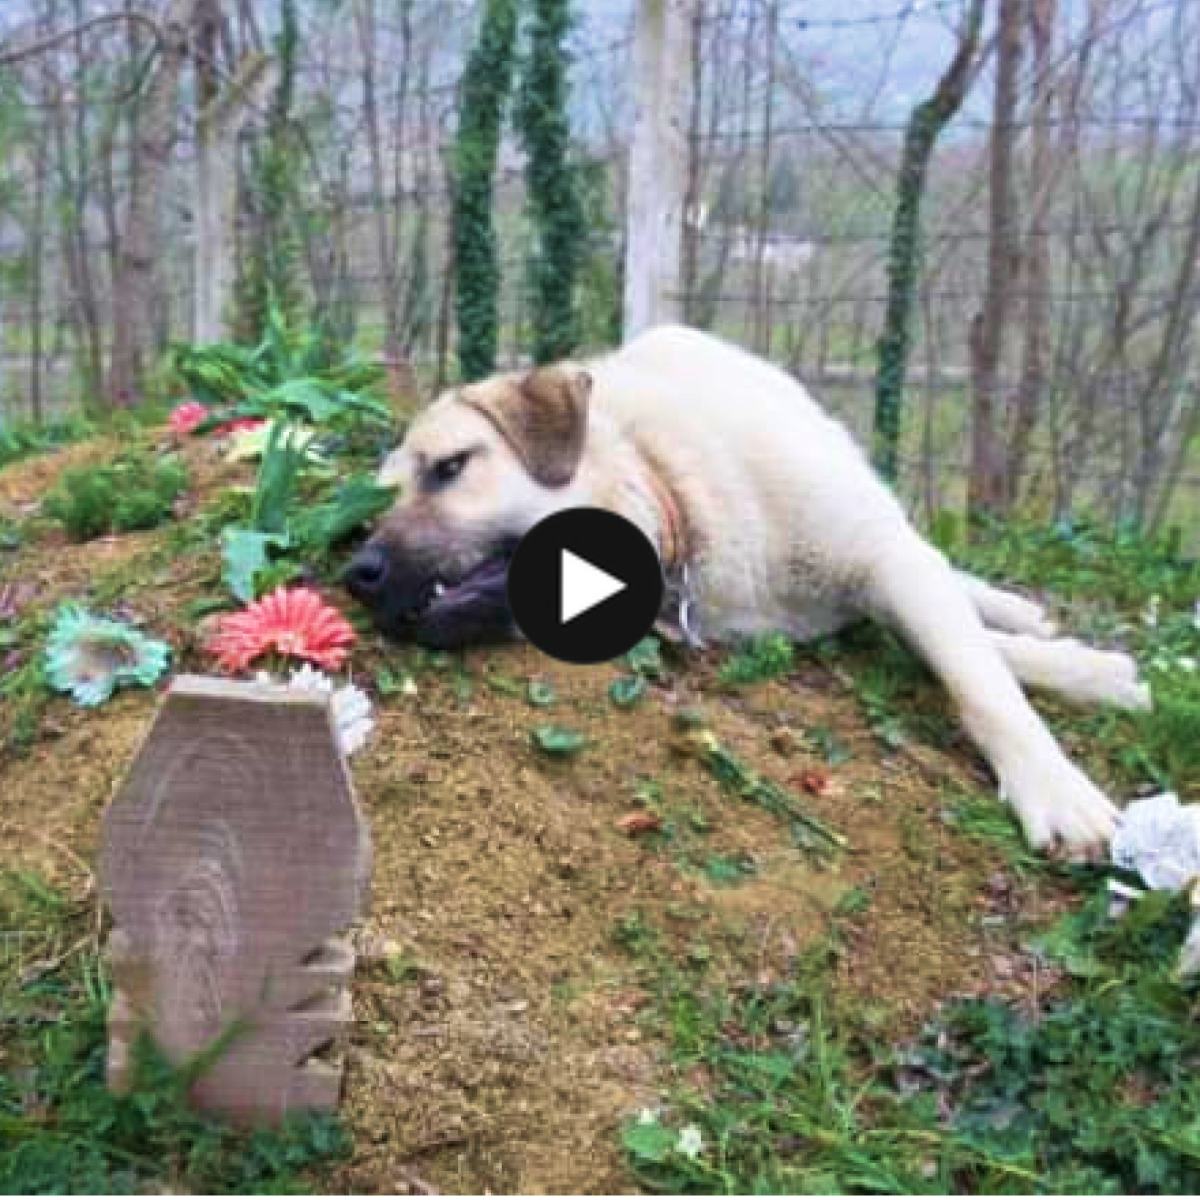 Unbreakable bond: Heart-wrenching devotion captures hearts with a faithful dog’s daily vigil beside its owner’s grave.